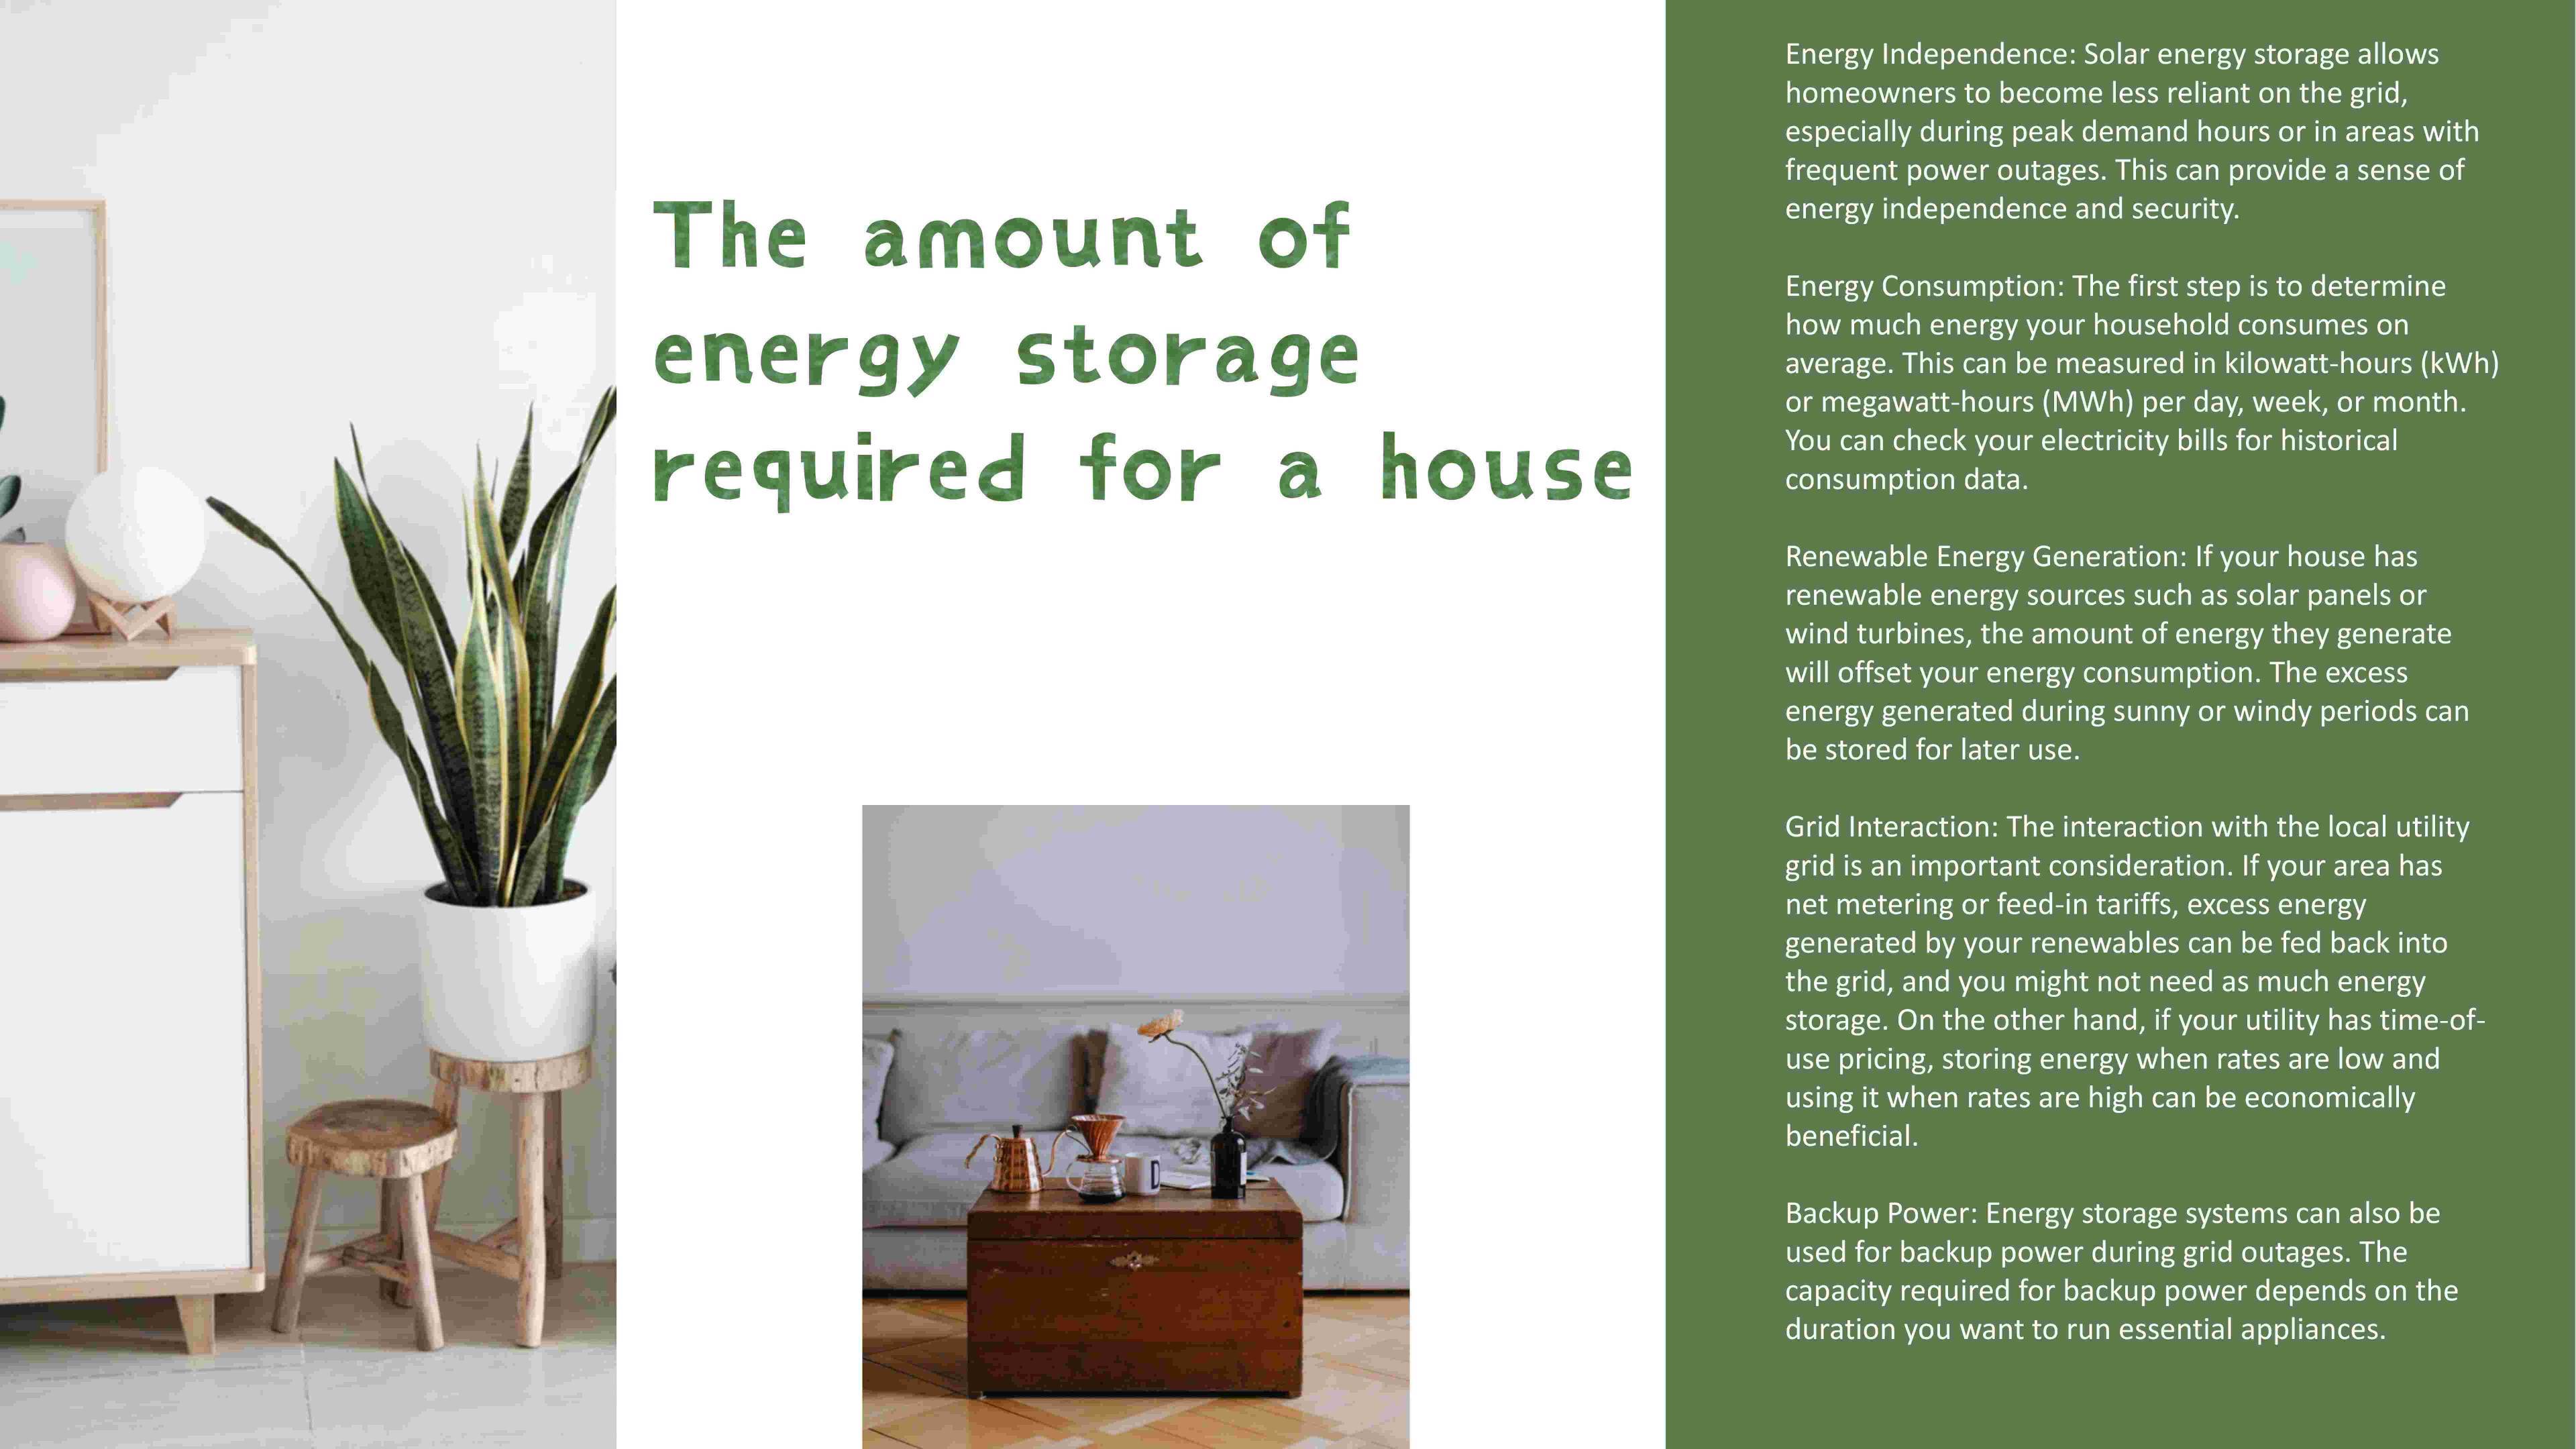 How much storage energy does your house need